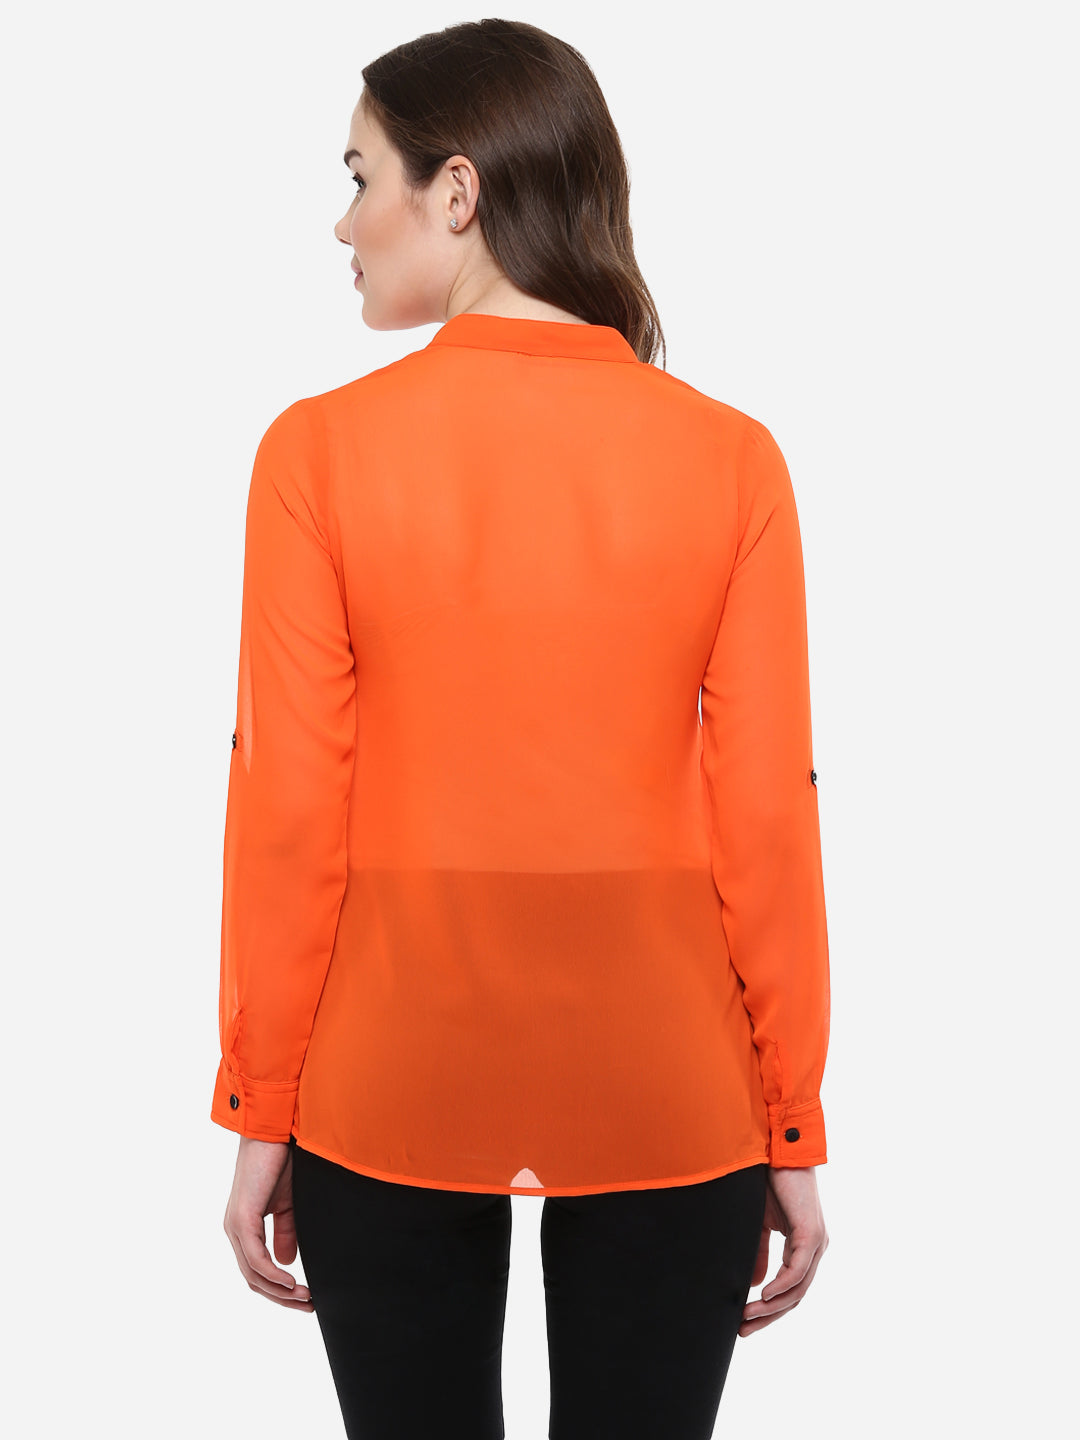 Women's Orange Georgette Top with Black Lace Up